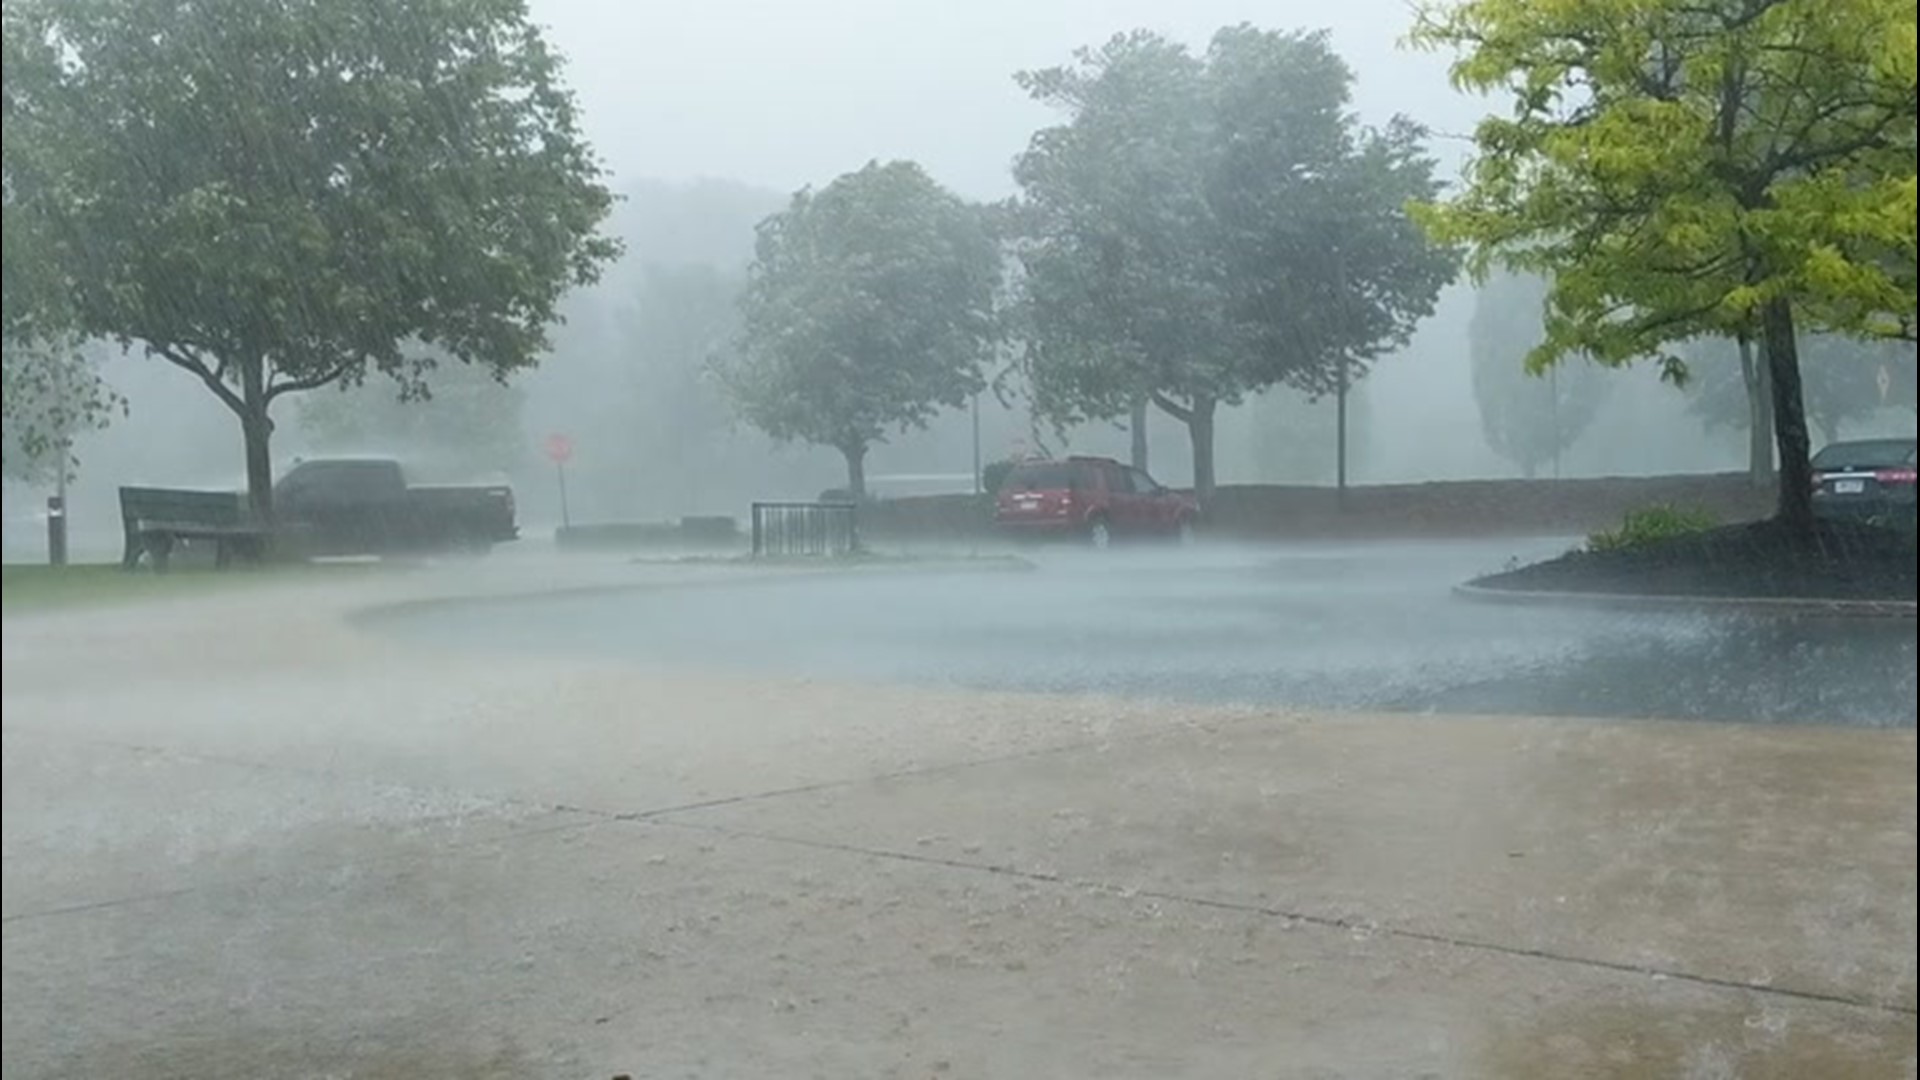 A thunderstorm on the morning of June 3 brought whipping winds and heavy rain to State College, Pennsylvania.